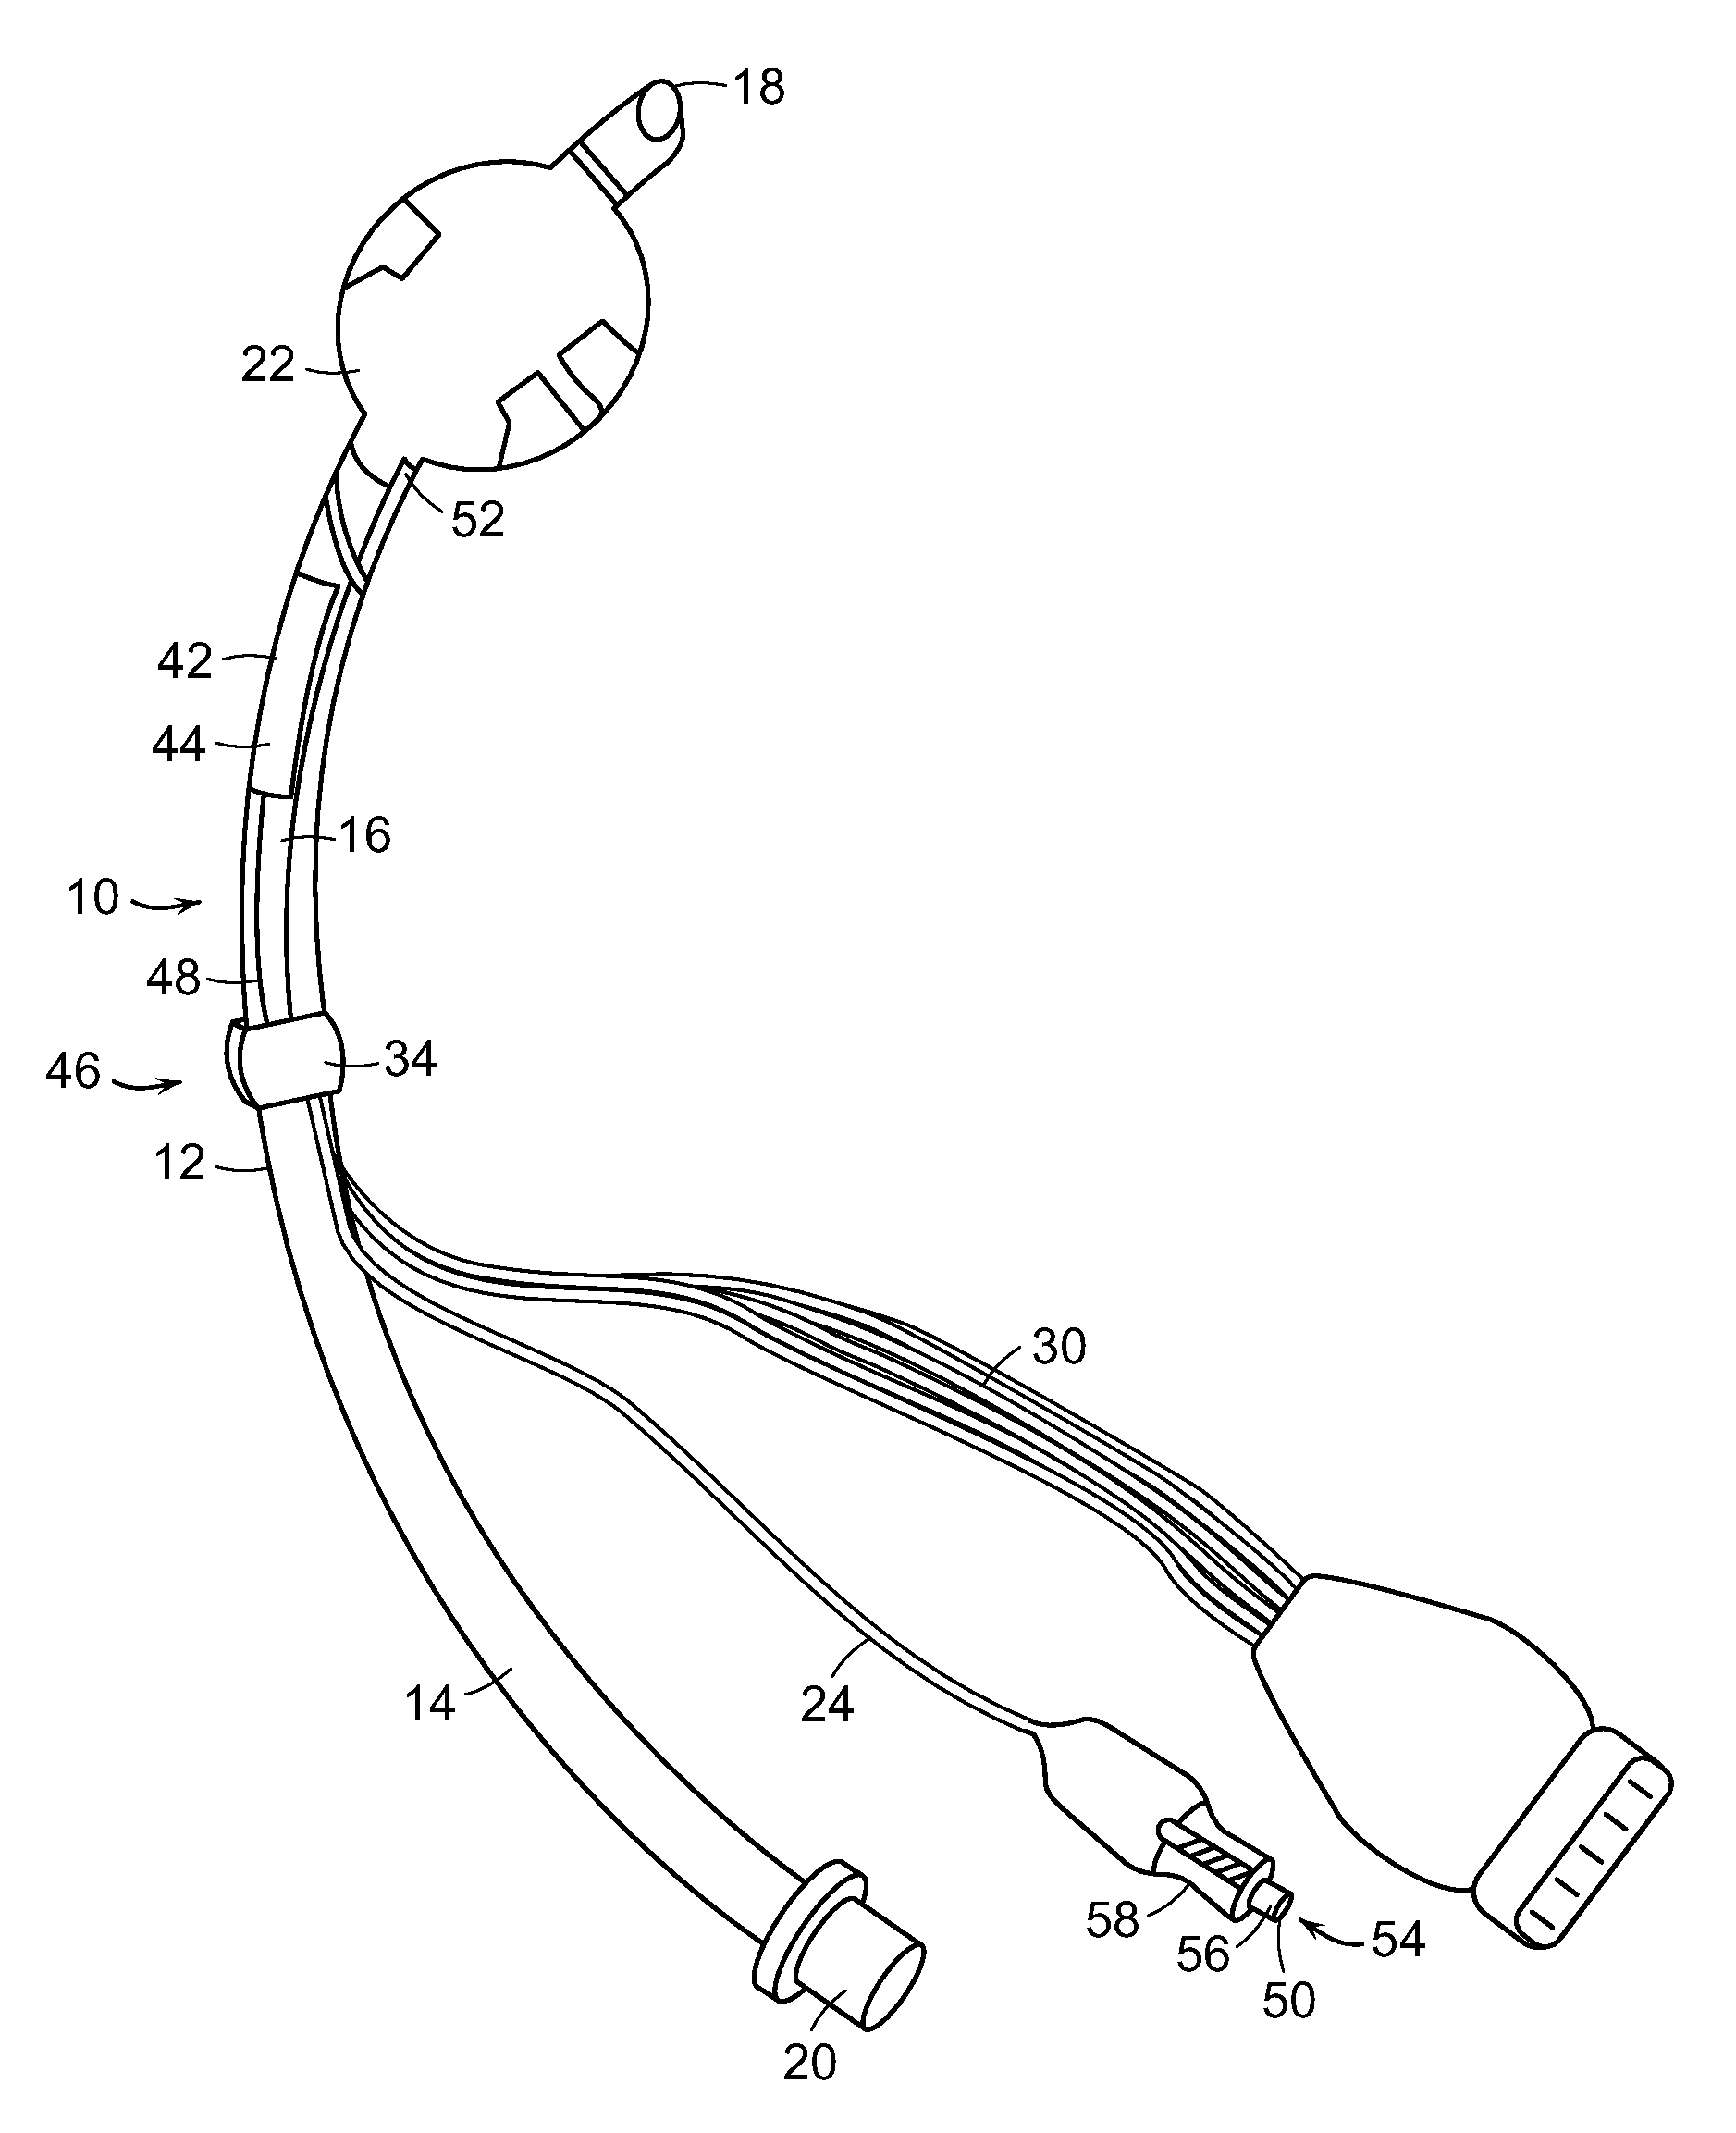 Apparatus and Methods for the Measurement of Cardiac Output